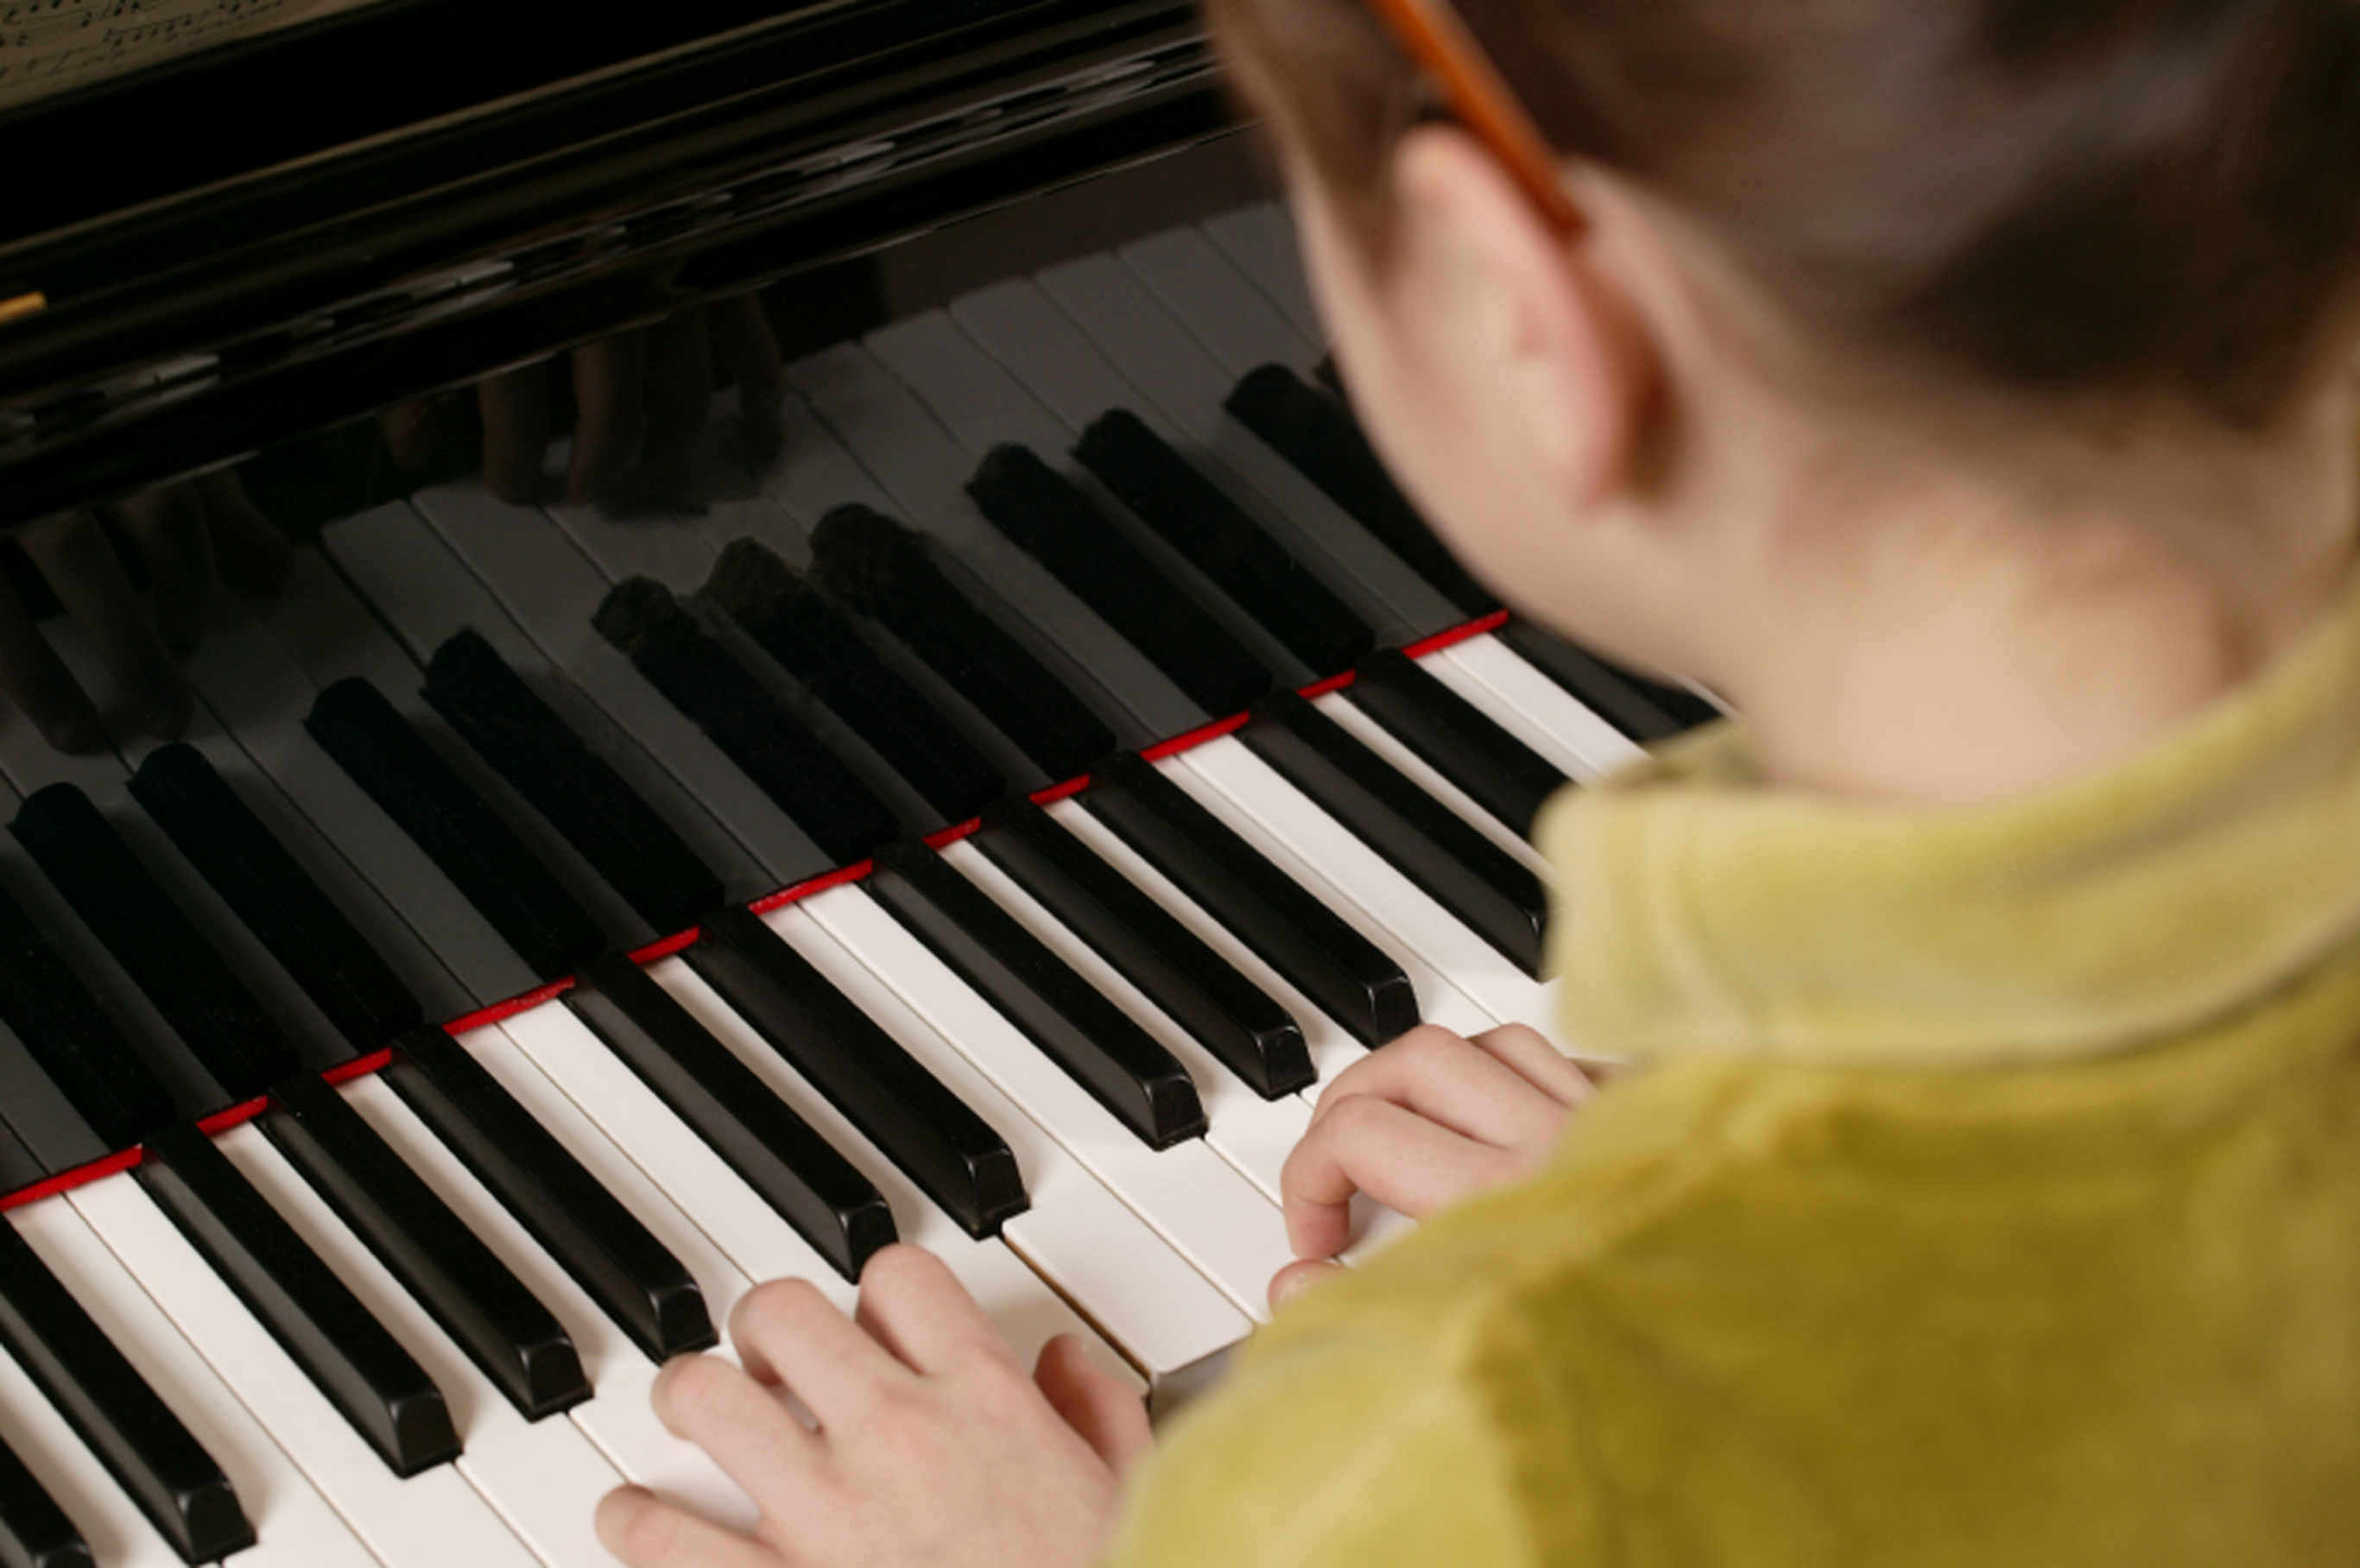 Private Piano Lessons: My Teaching Style